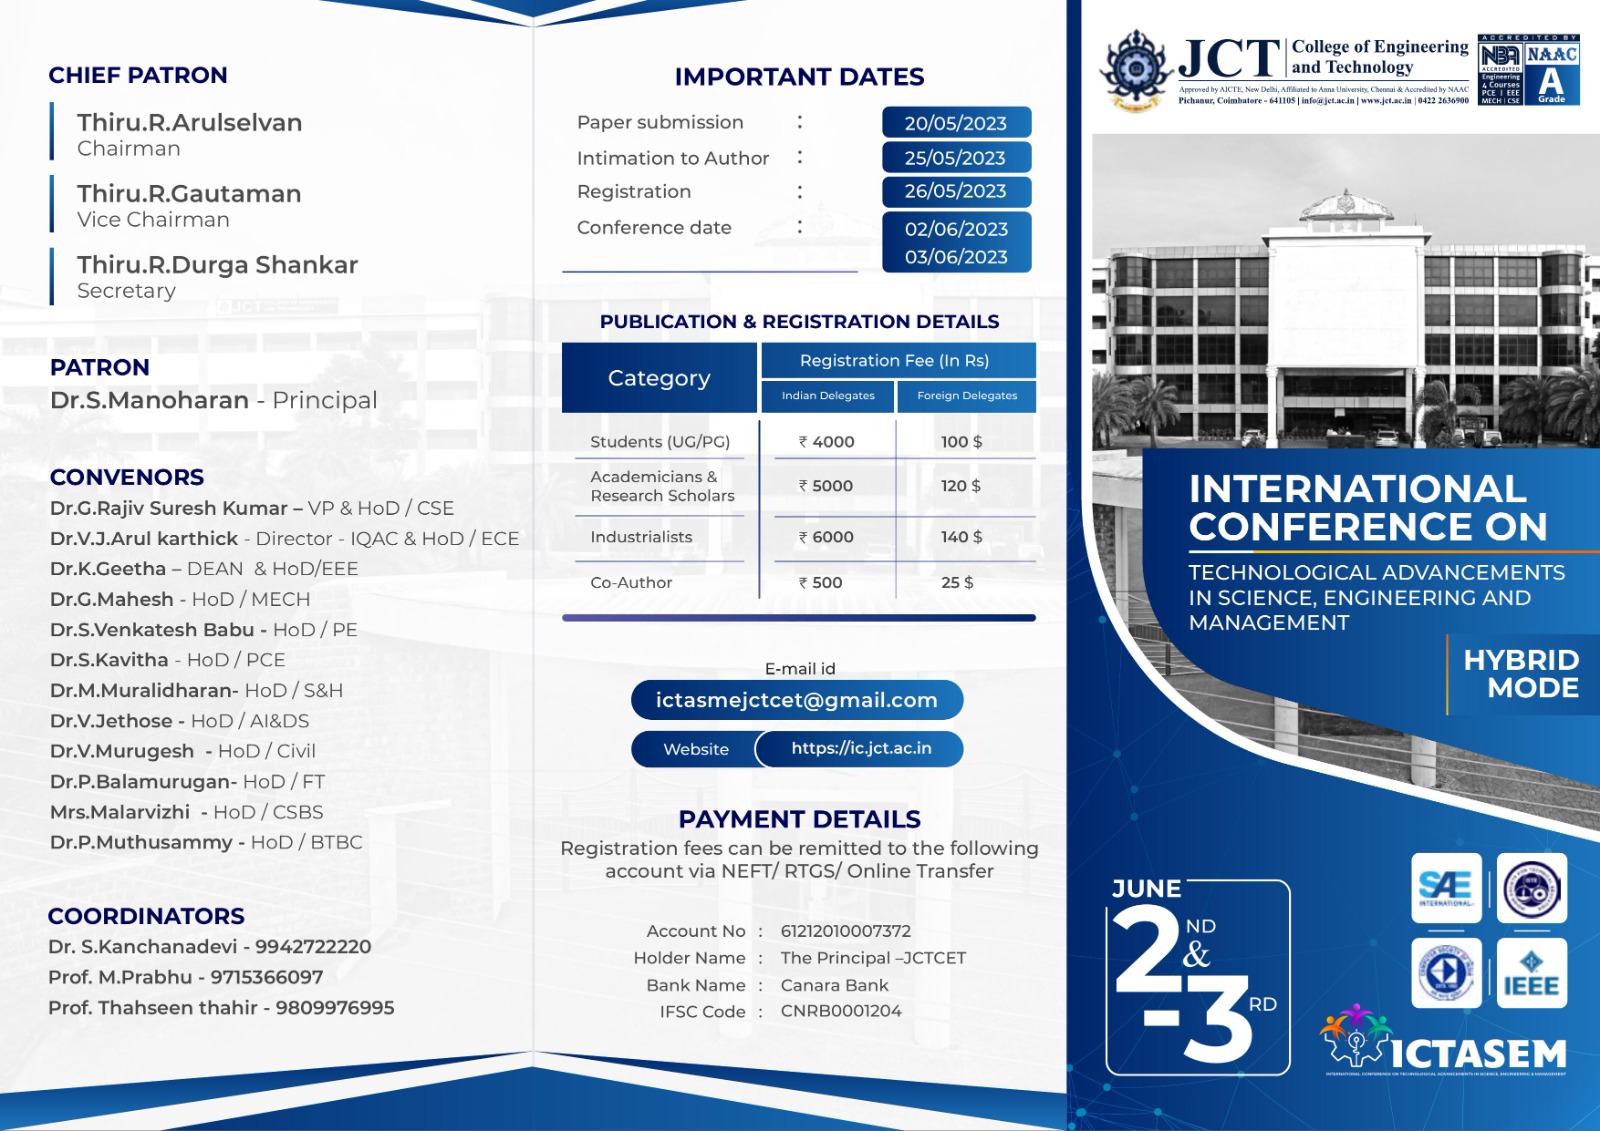 International Conference on Technological Advancements in Science, Engineering and Management ICTASEM 23